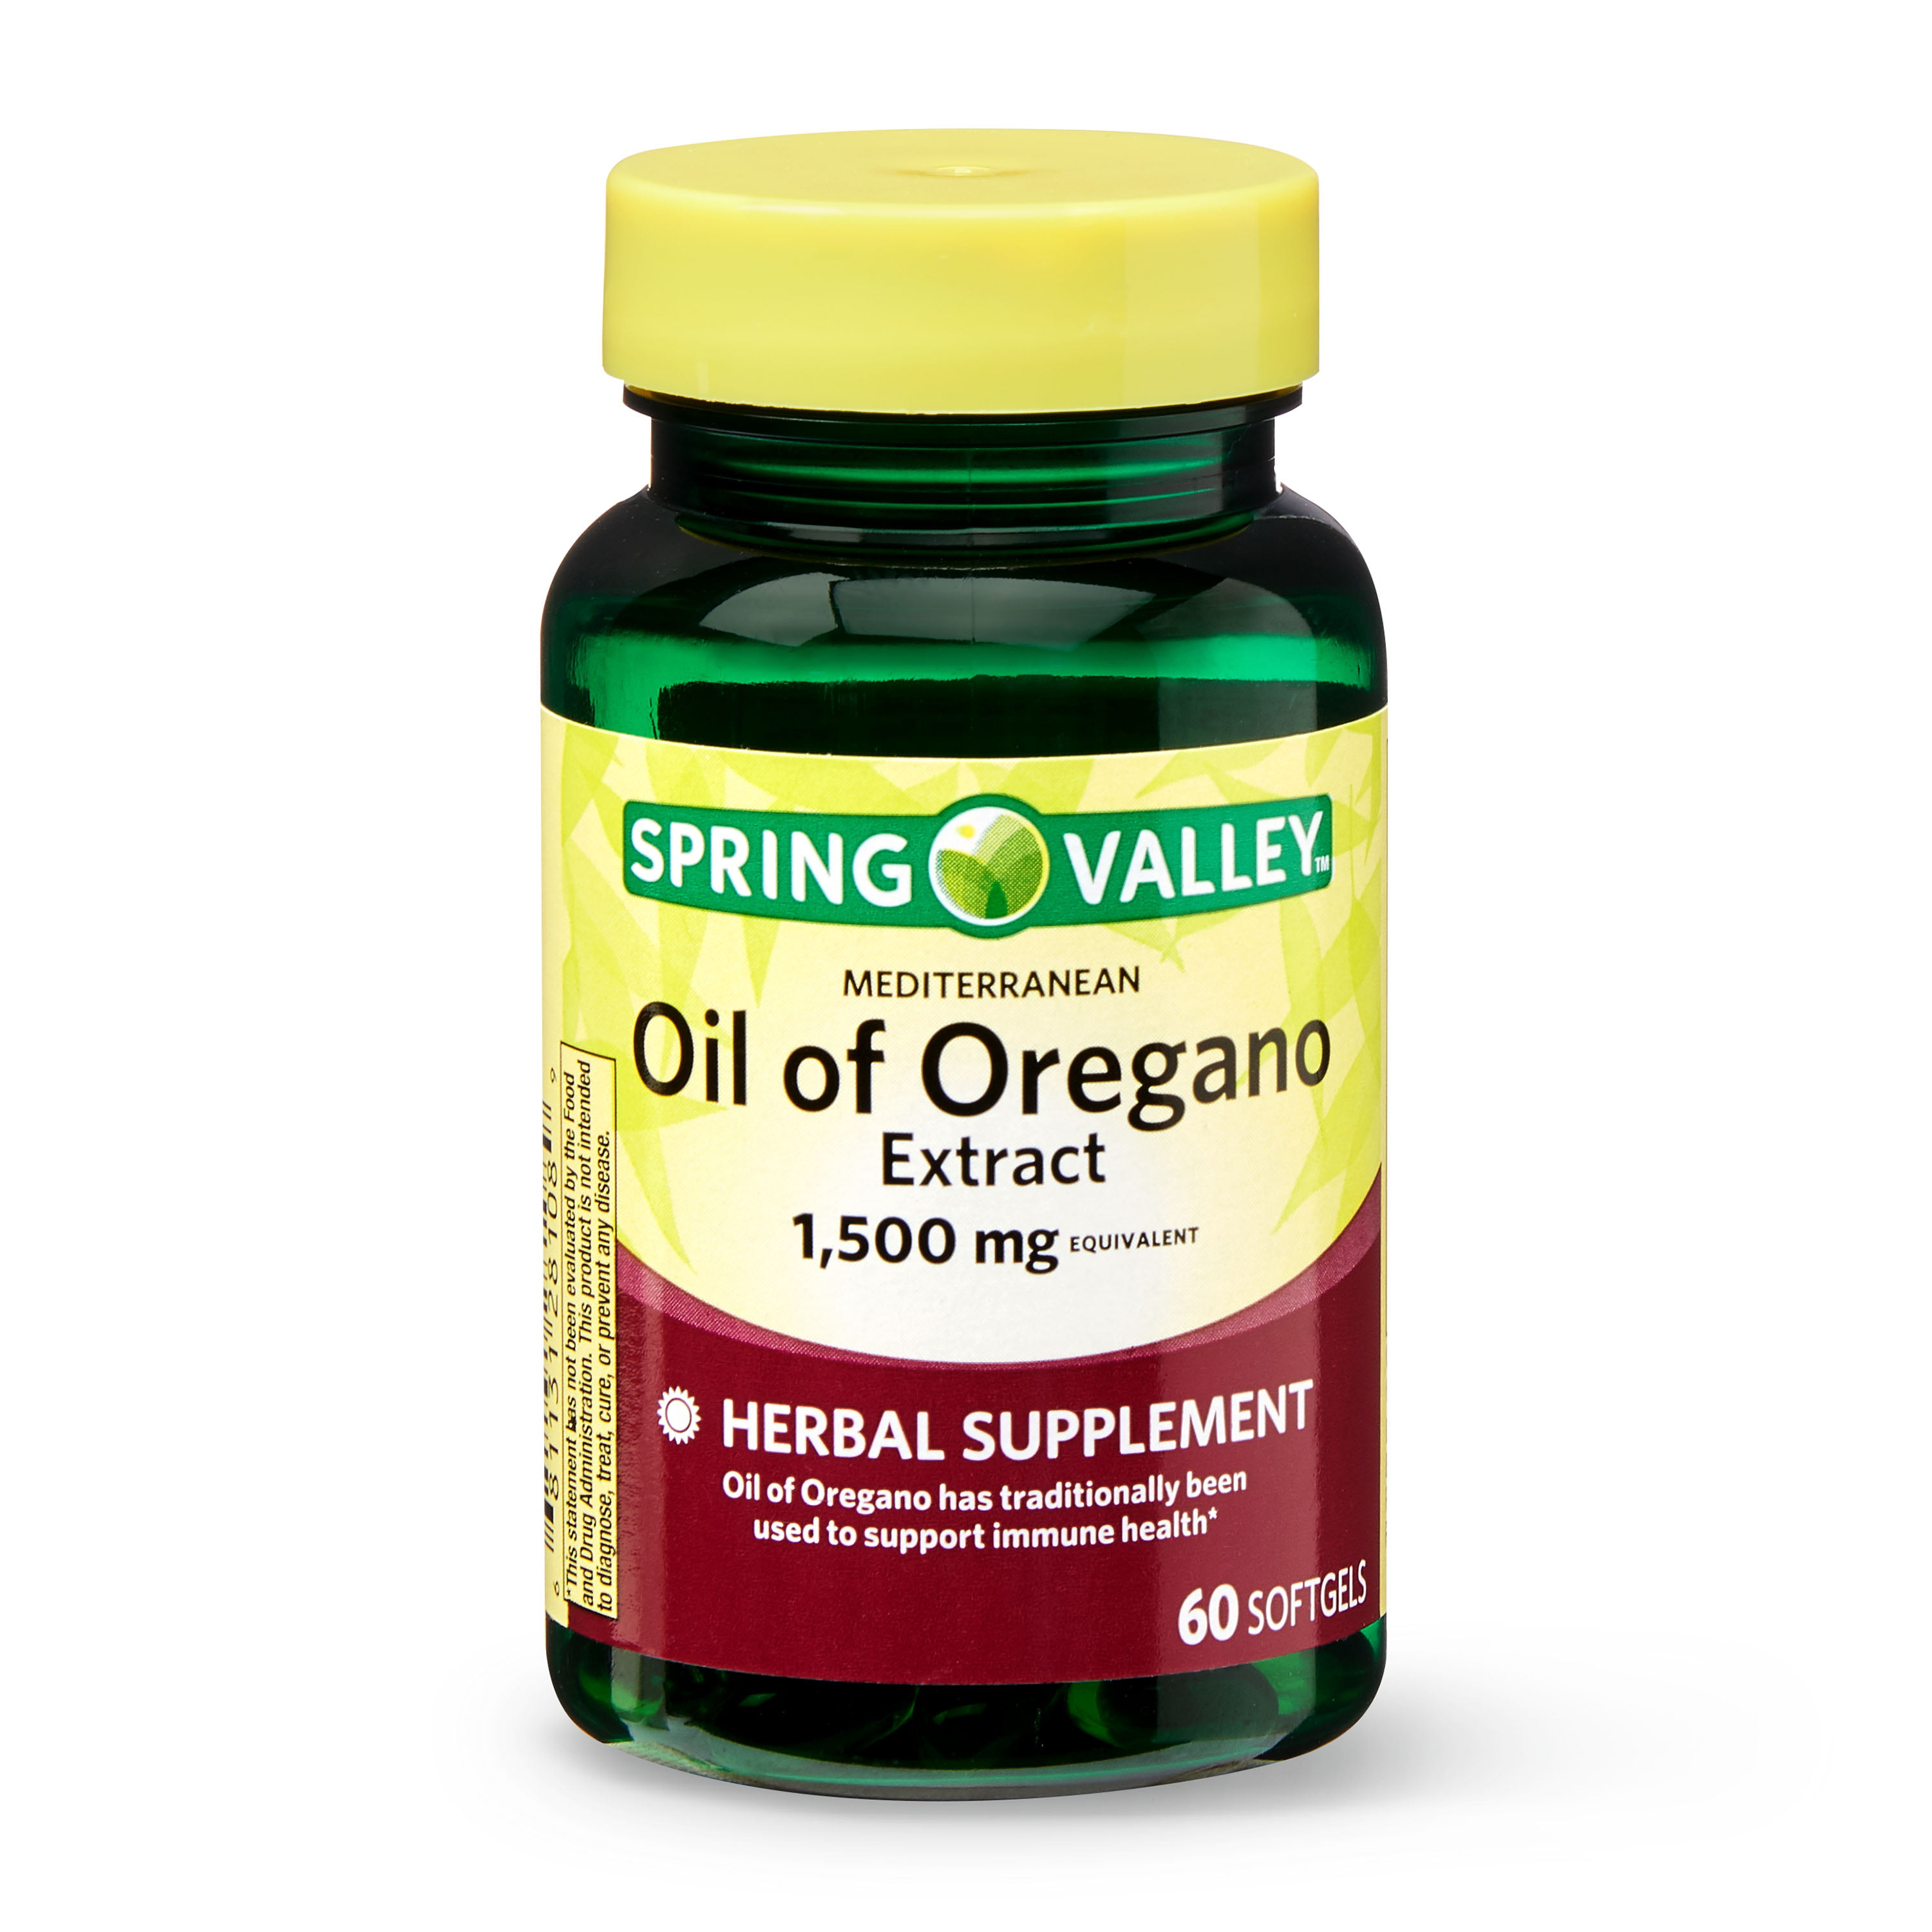 Spring Valley Mediterranean Oil of Oregano Extract Softgels, 1,500 mg, 60 Count